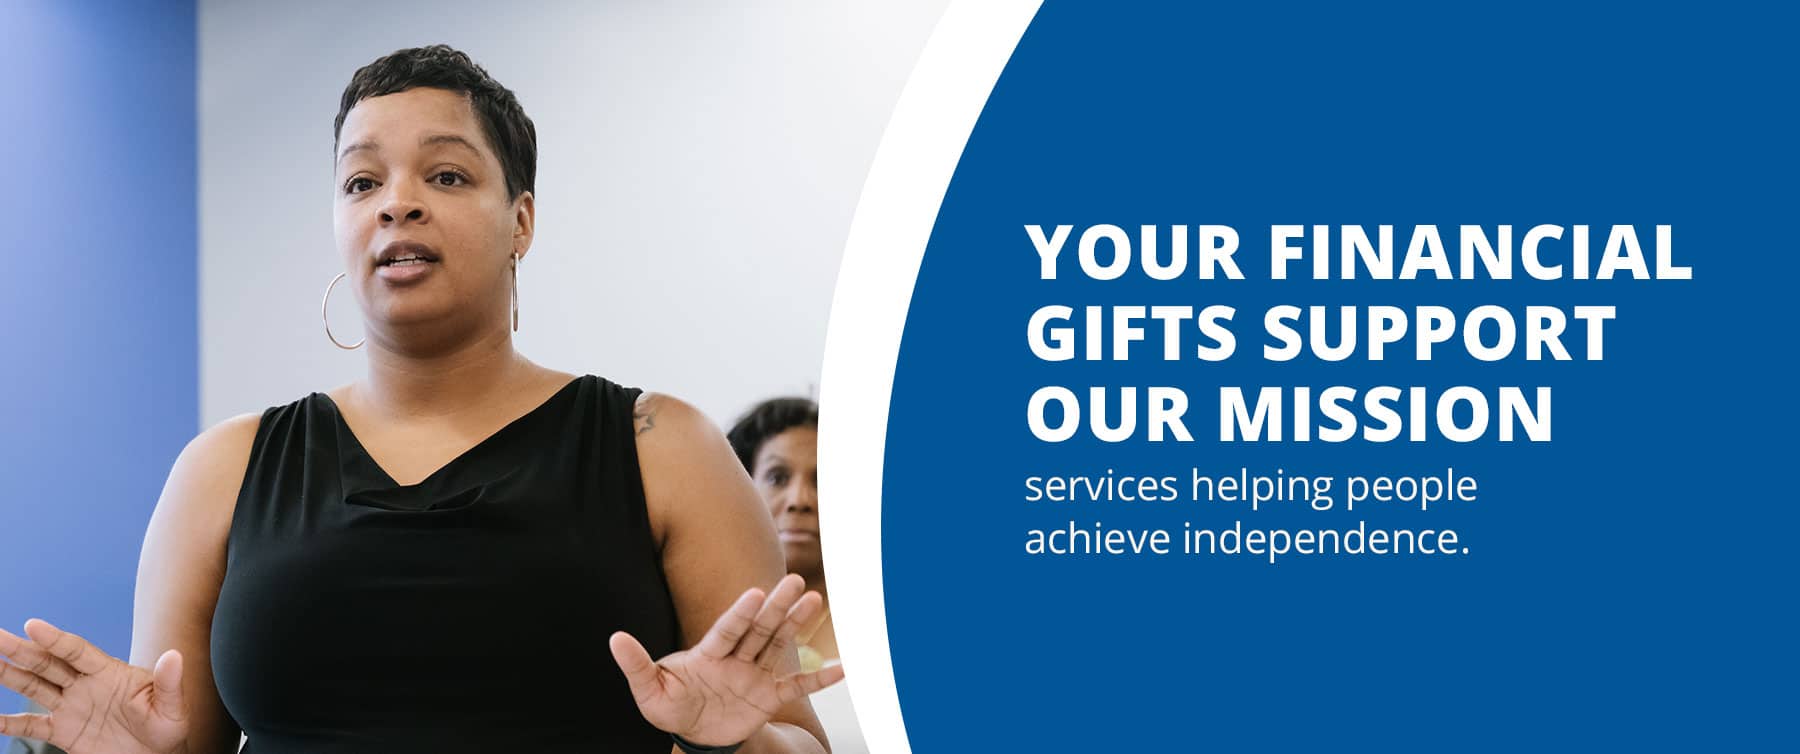 Your financial gifts support our mission services helping people achieve independence. 